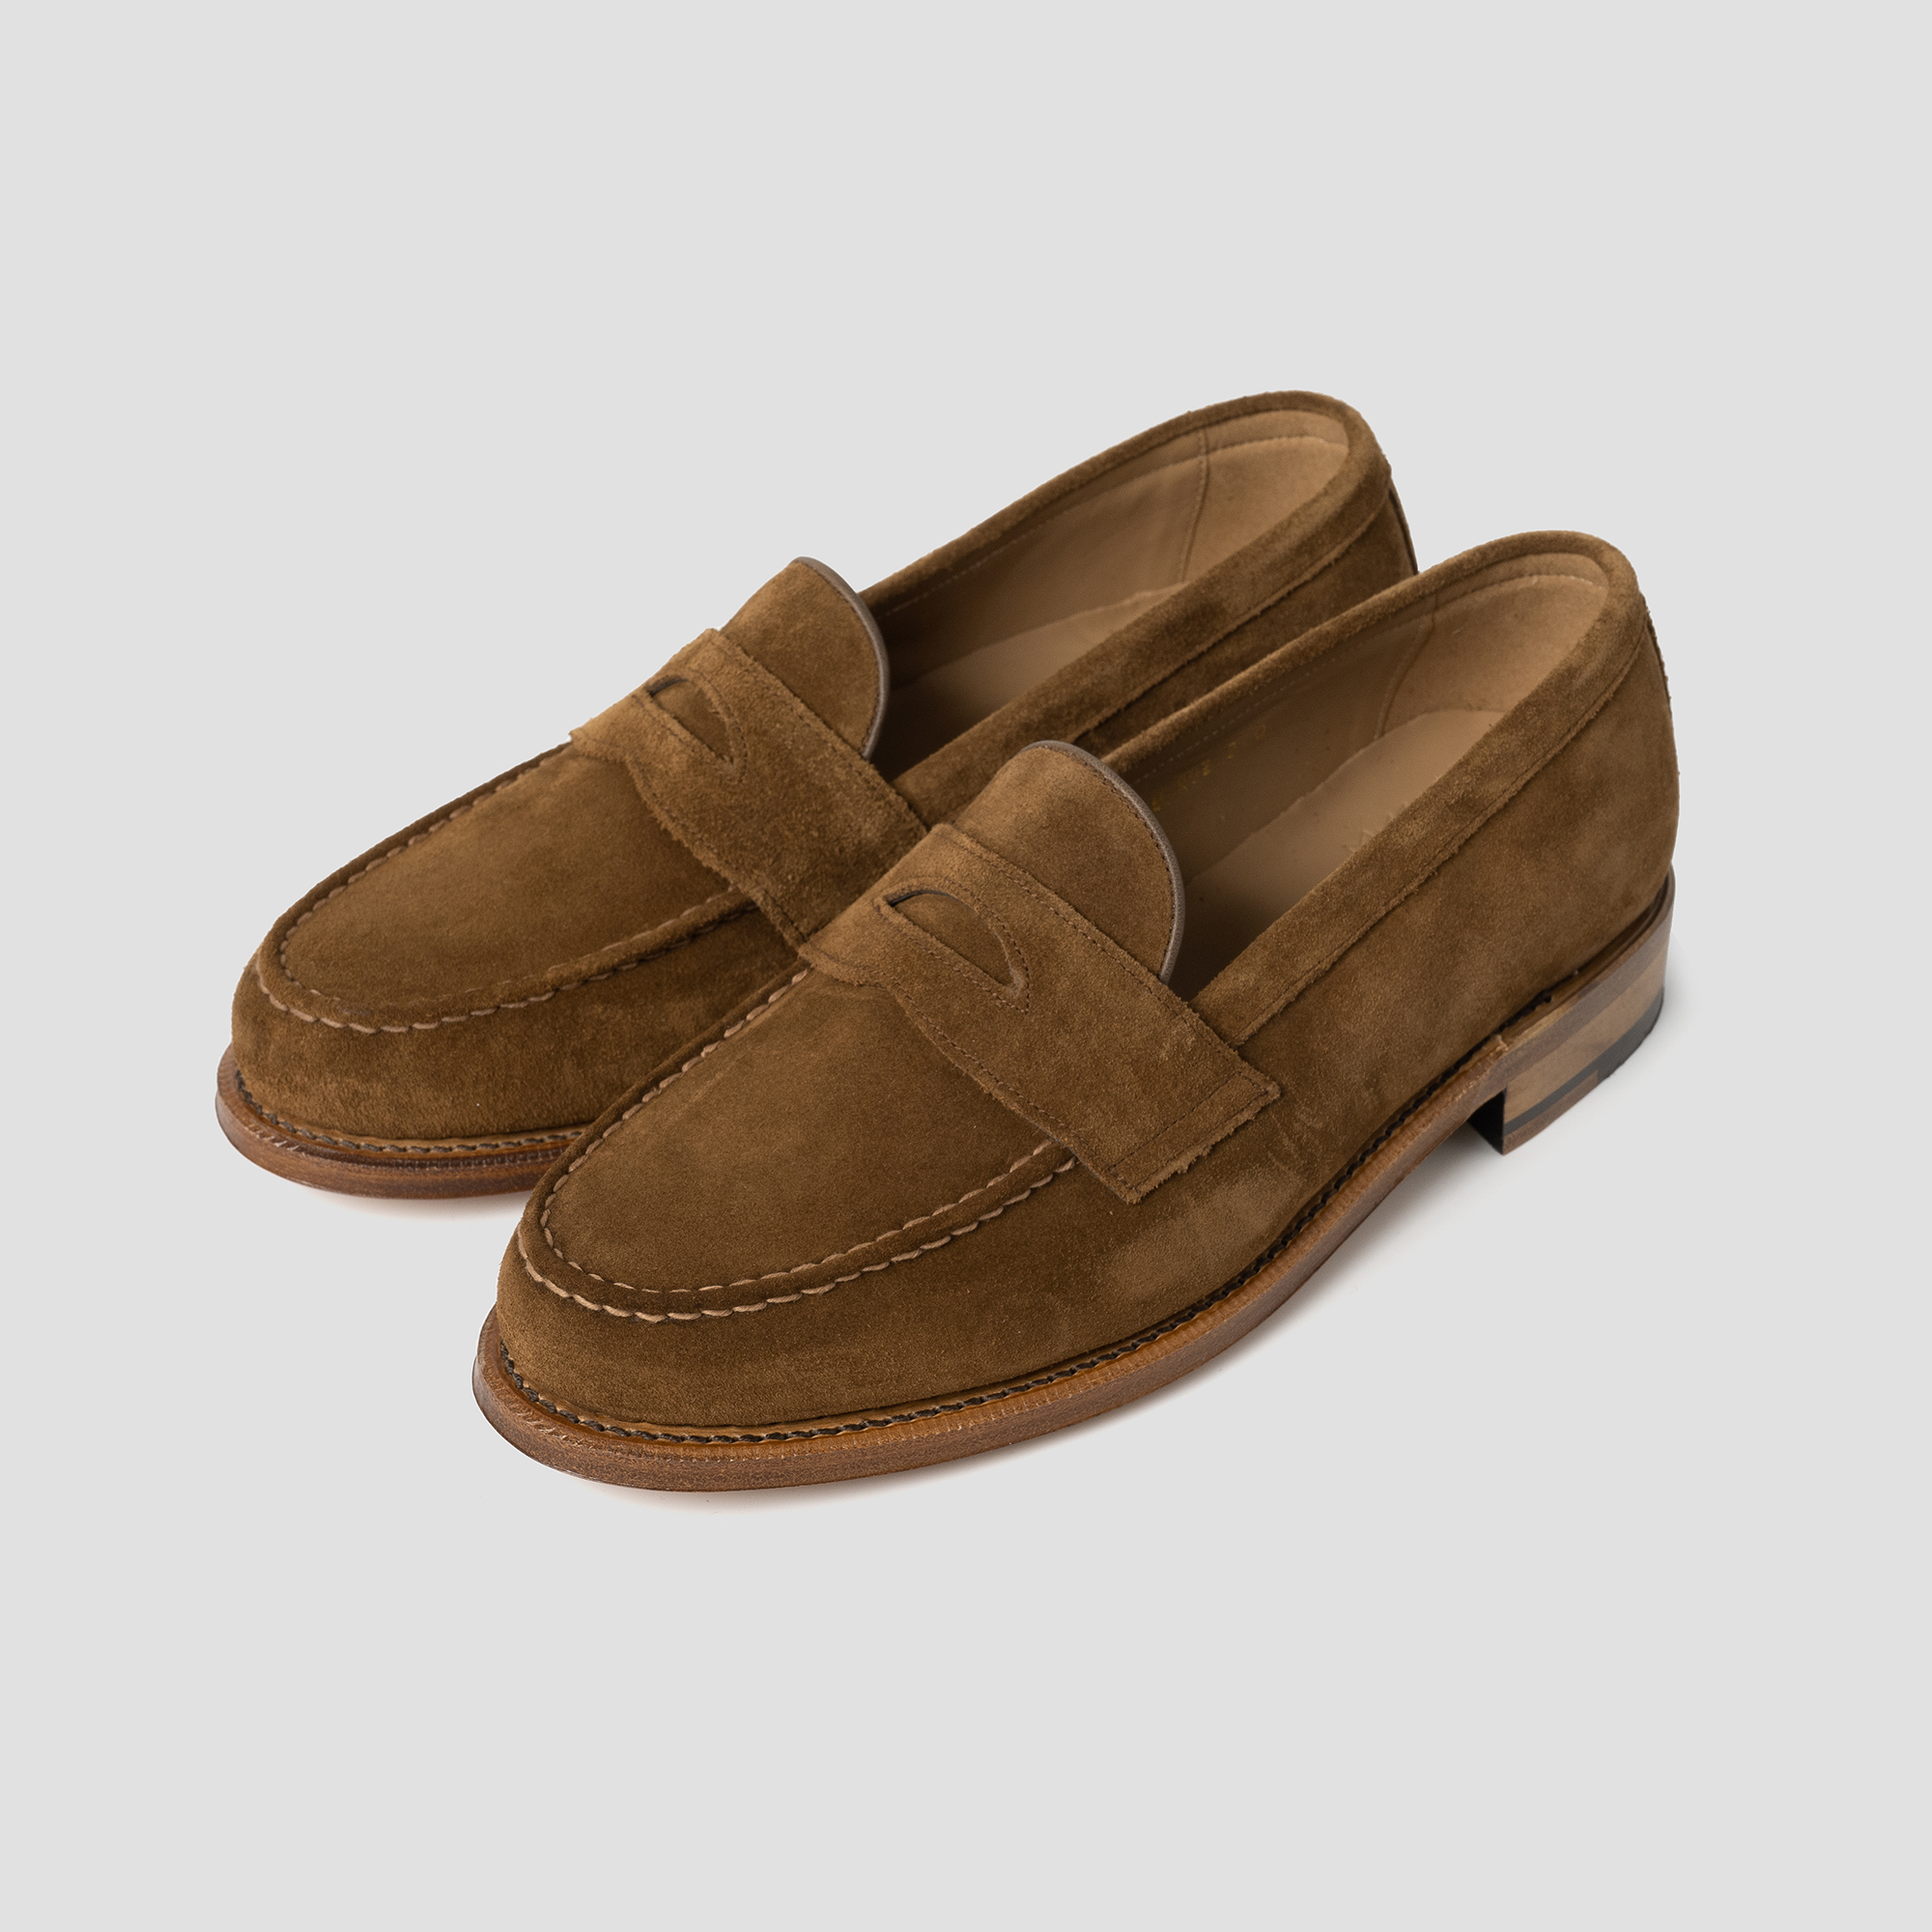 MELAVORO Goodyear Welted Suede Penny Loafer [Brown]리넥츠